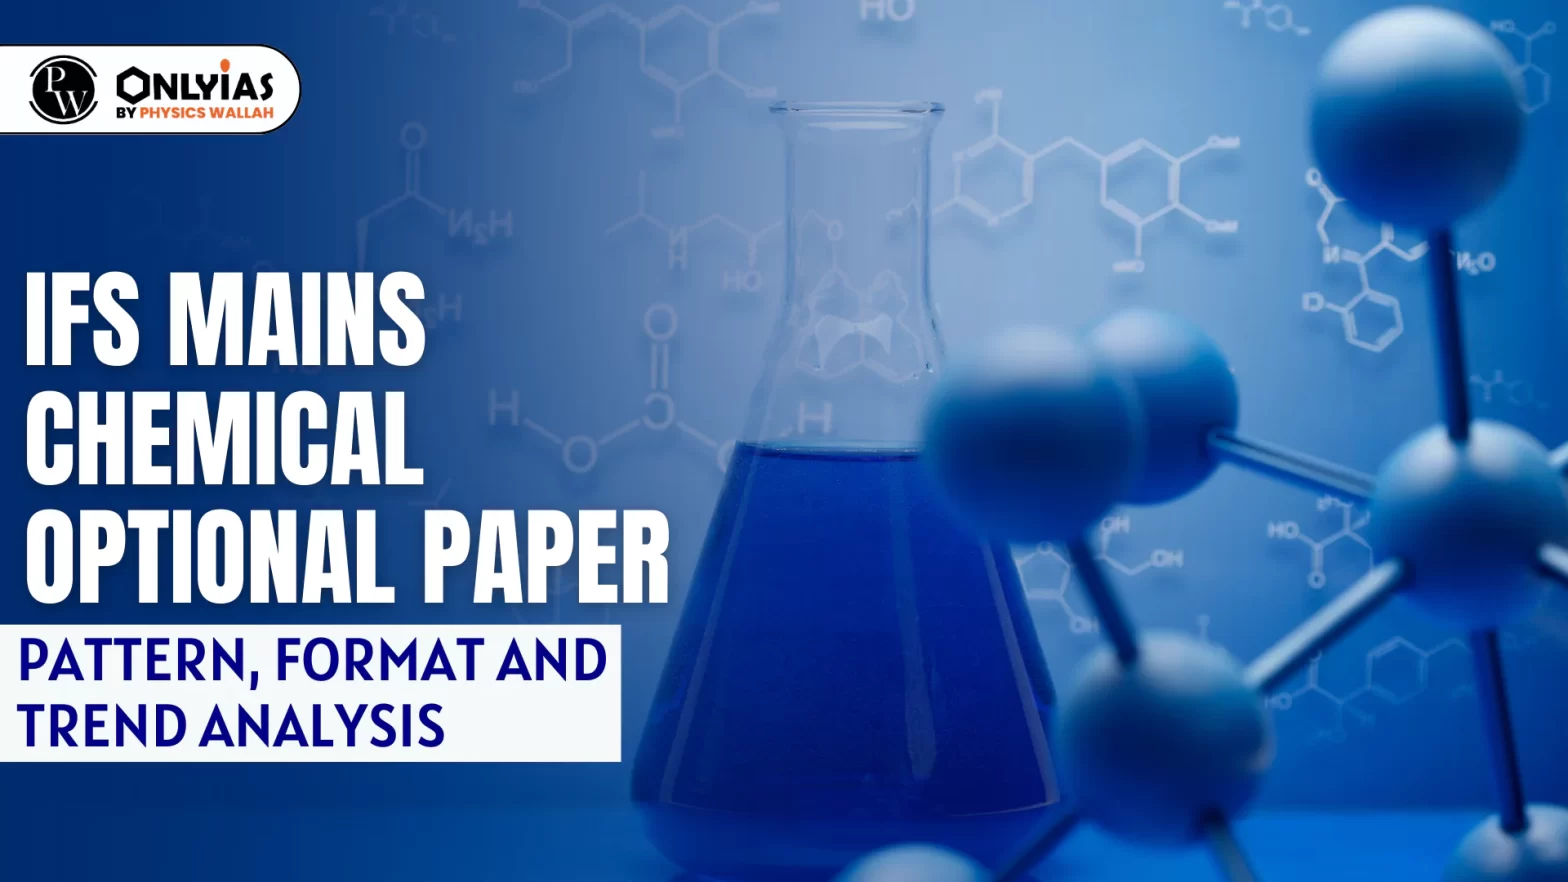 IFS Mains Chemical Optional Paper: Pattern, Format and Trend Analysis